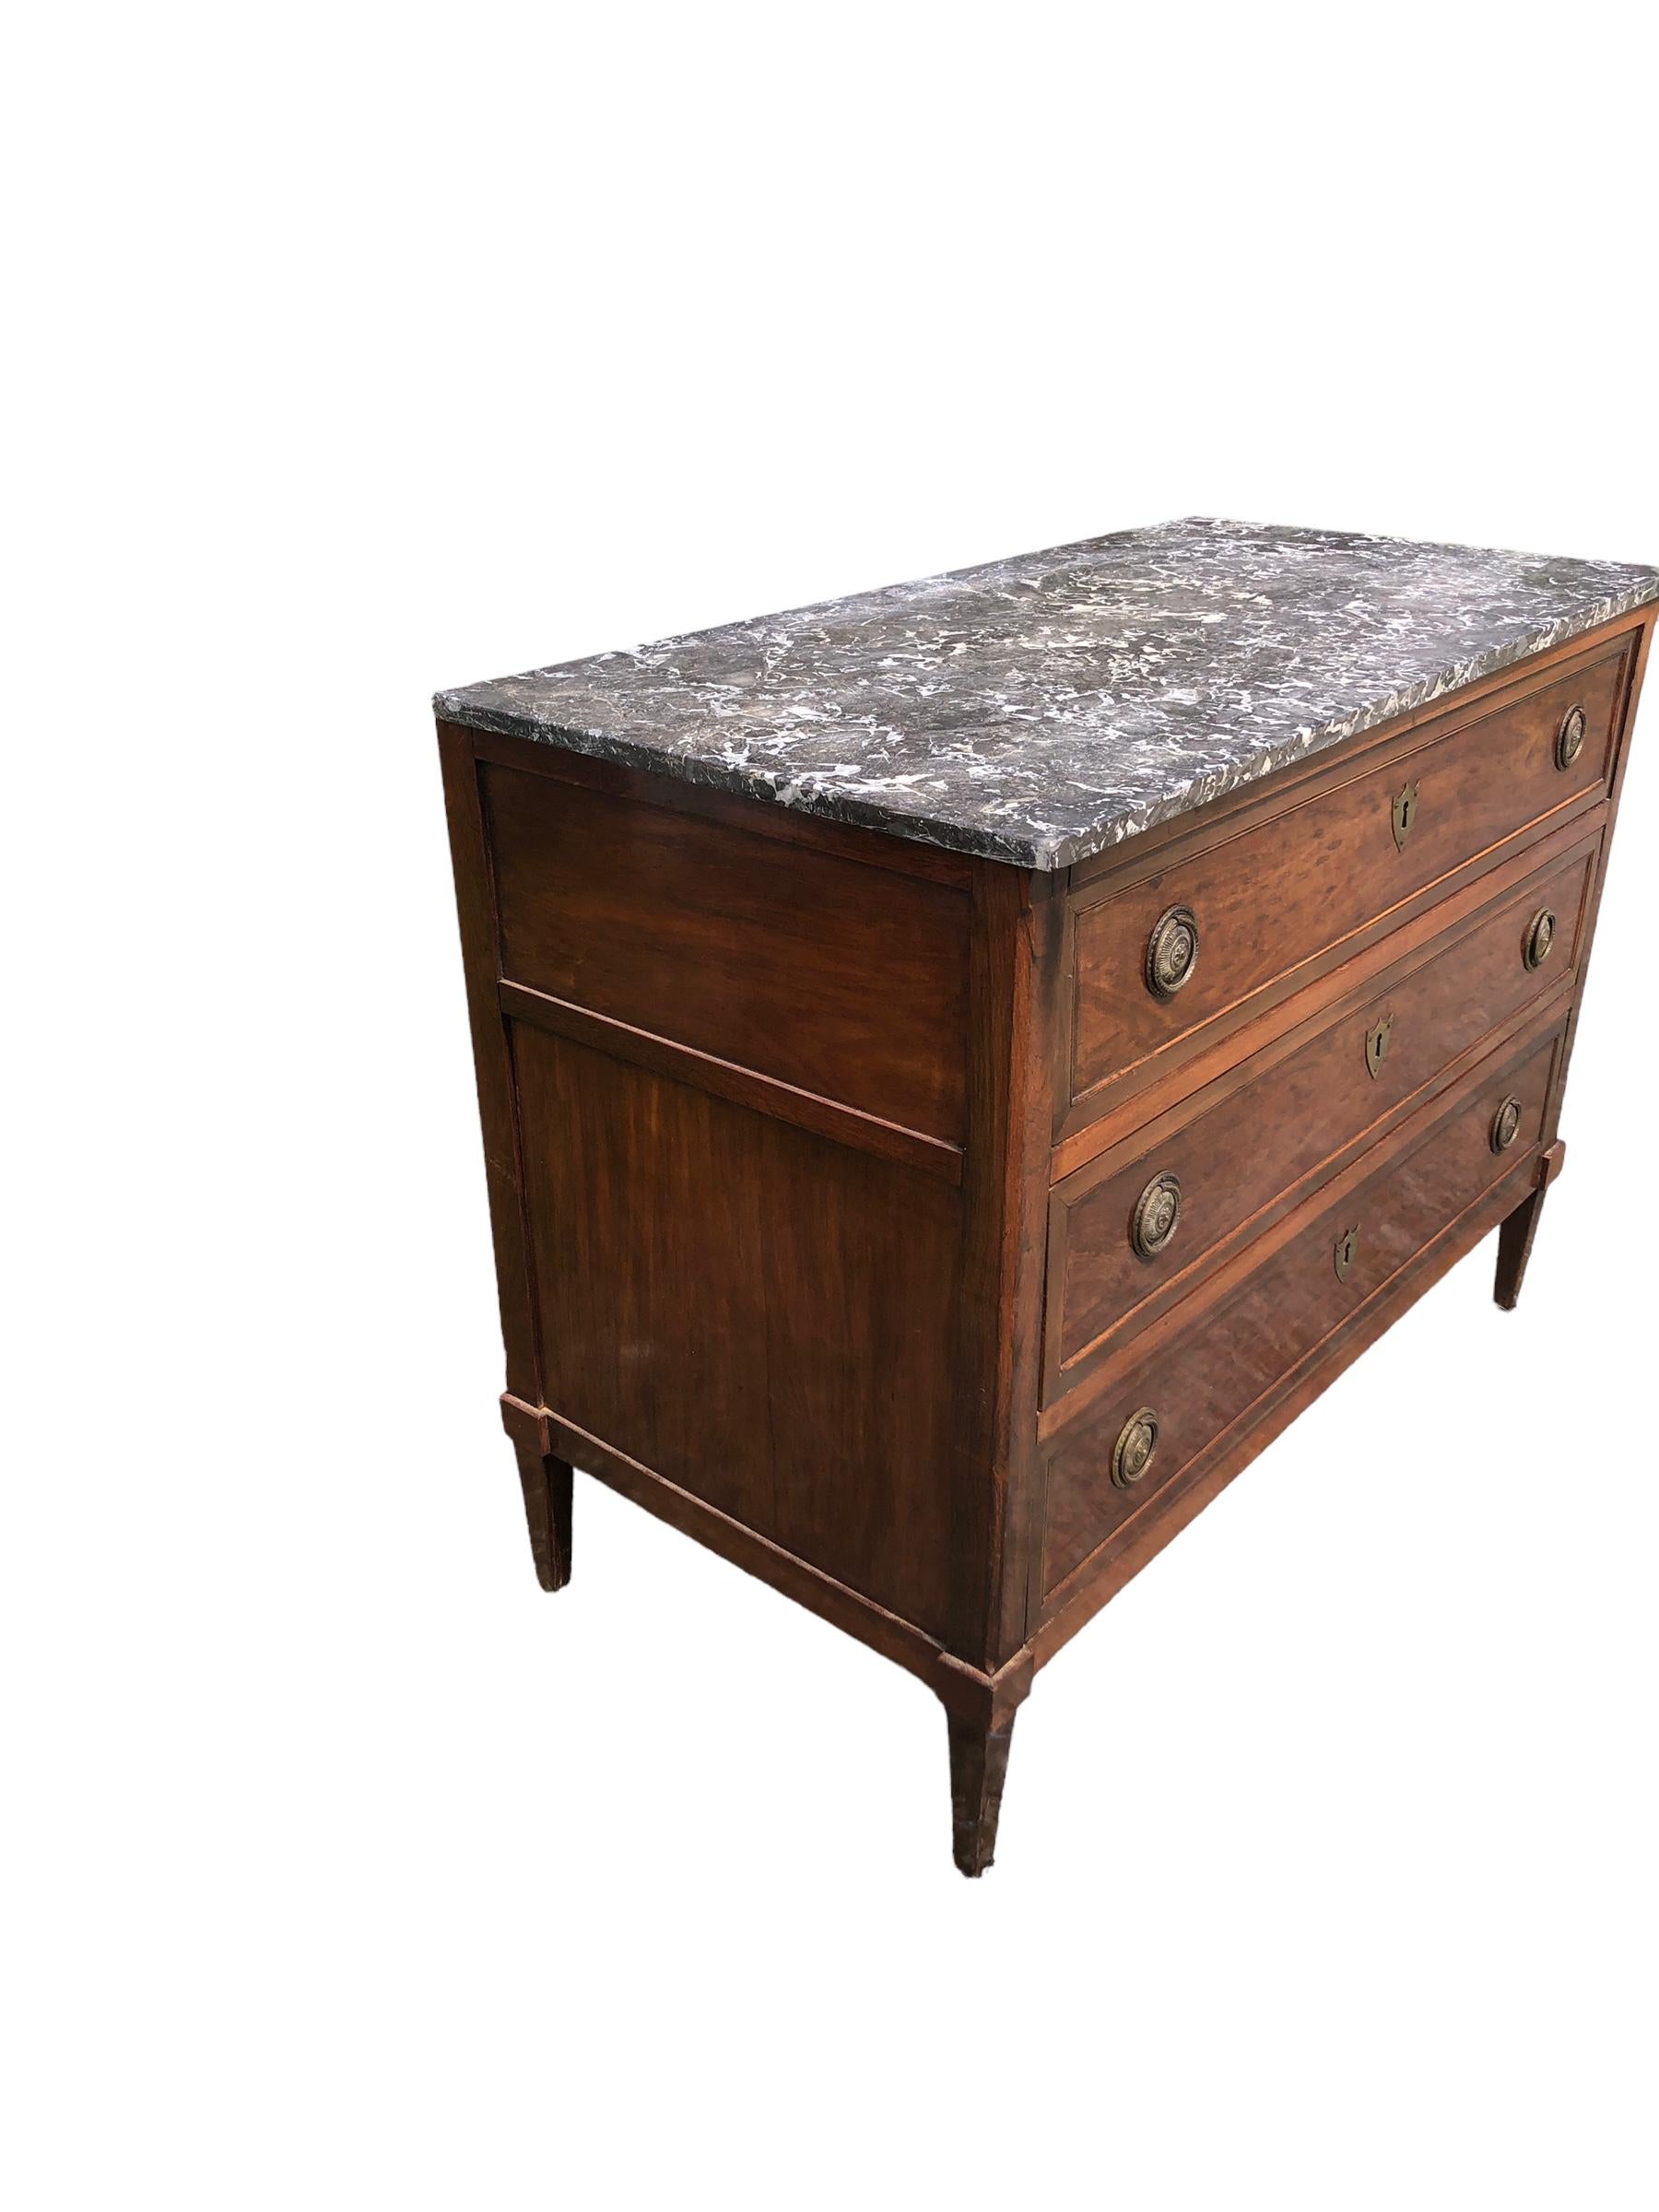 19th Century Louis XVI Style Marble Top Plum Pudding Mahogany Chest For Sale 5